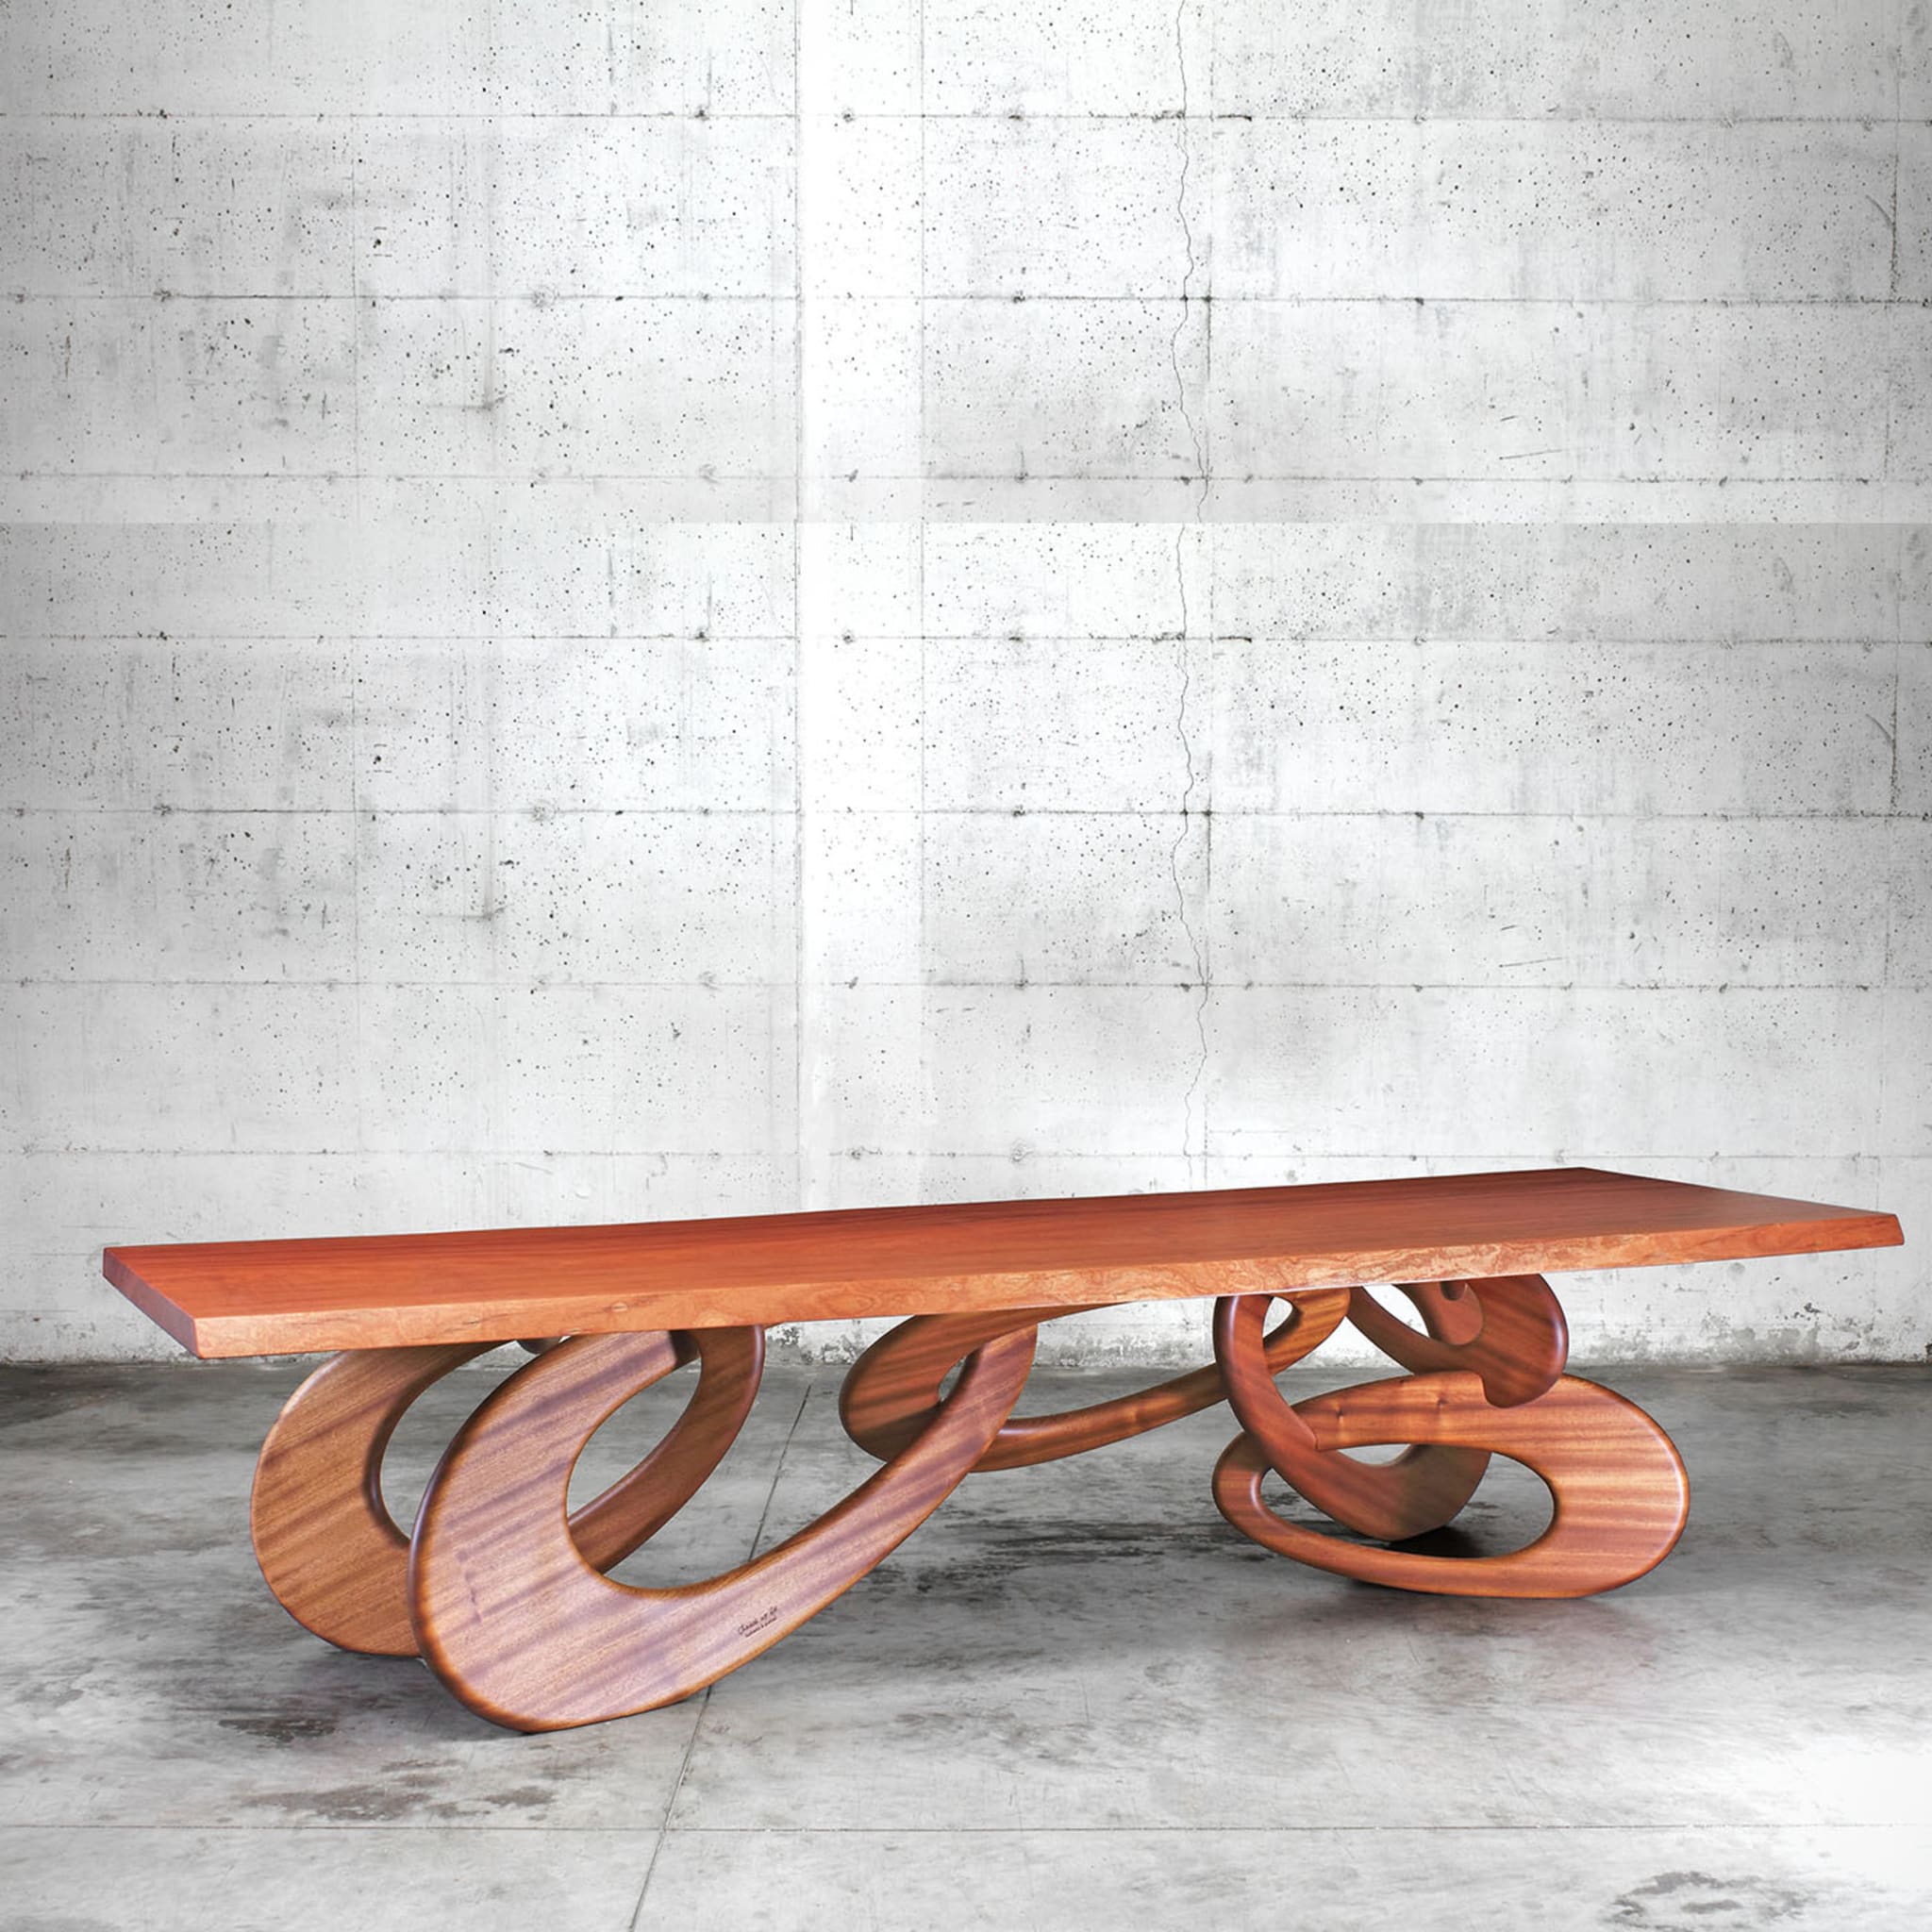 Chained Up Dining Table - Alternative view 4